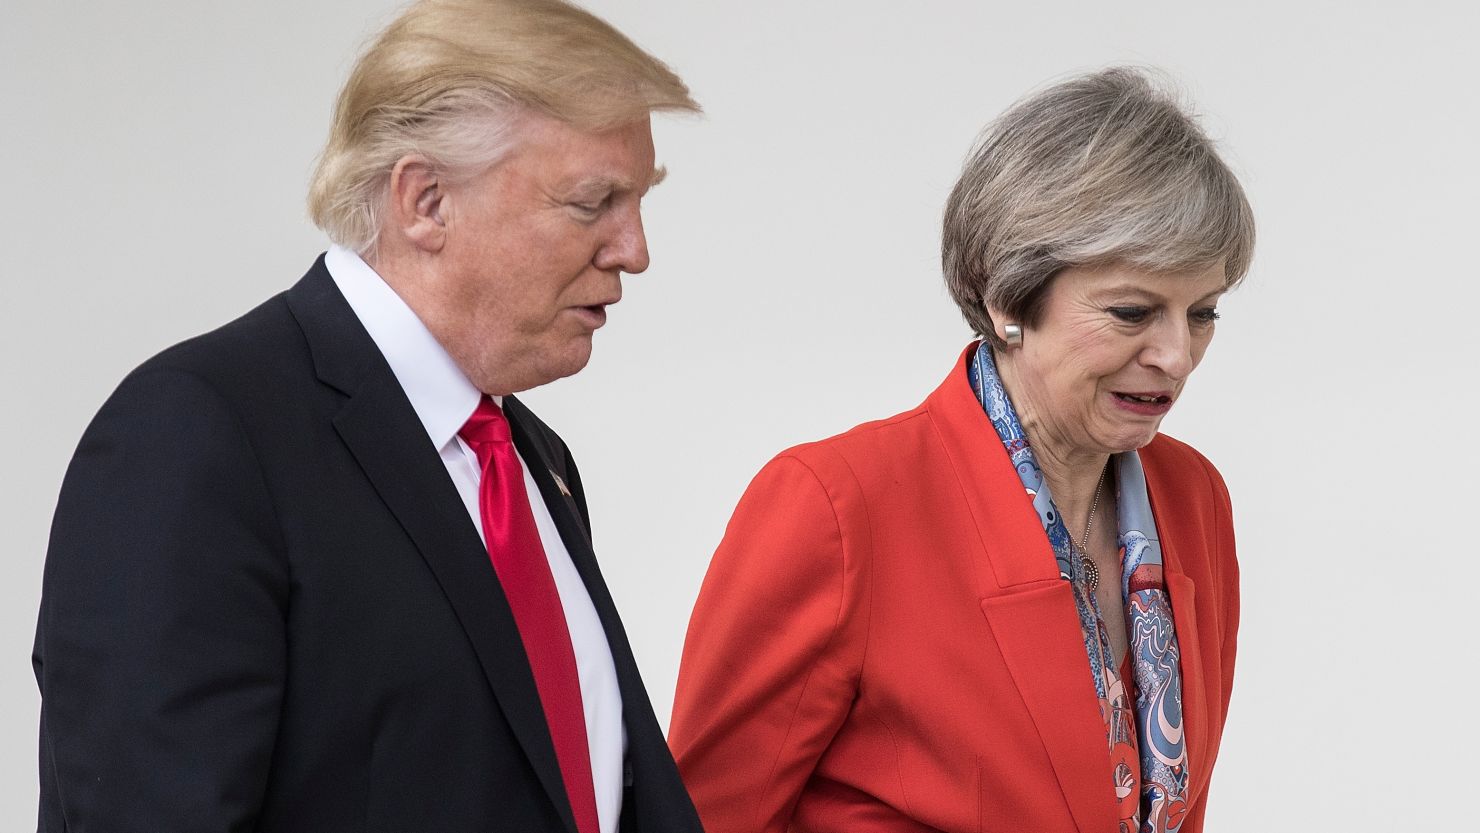 Donald Trump and Theresa May (R) met at the White House in late January.